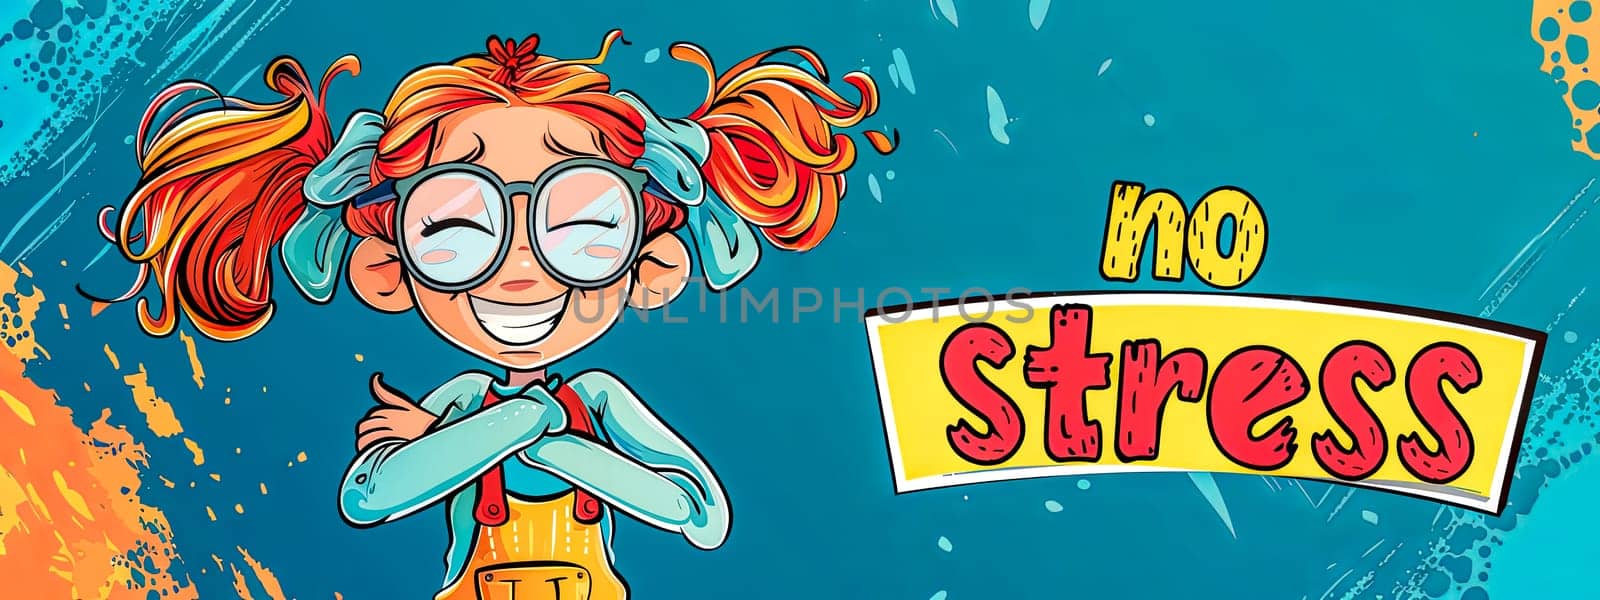 Cheerful animated young girl with vibrant hair, big glasses, embracing a relaxed, stress-free attitude